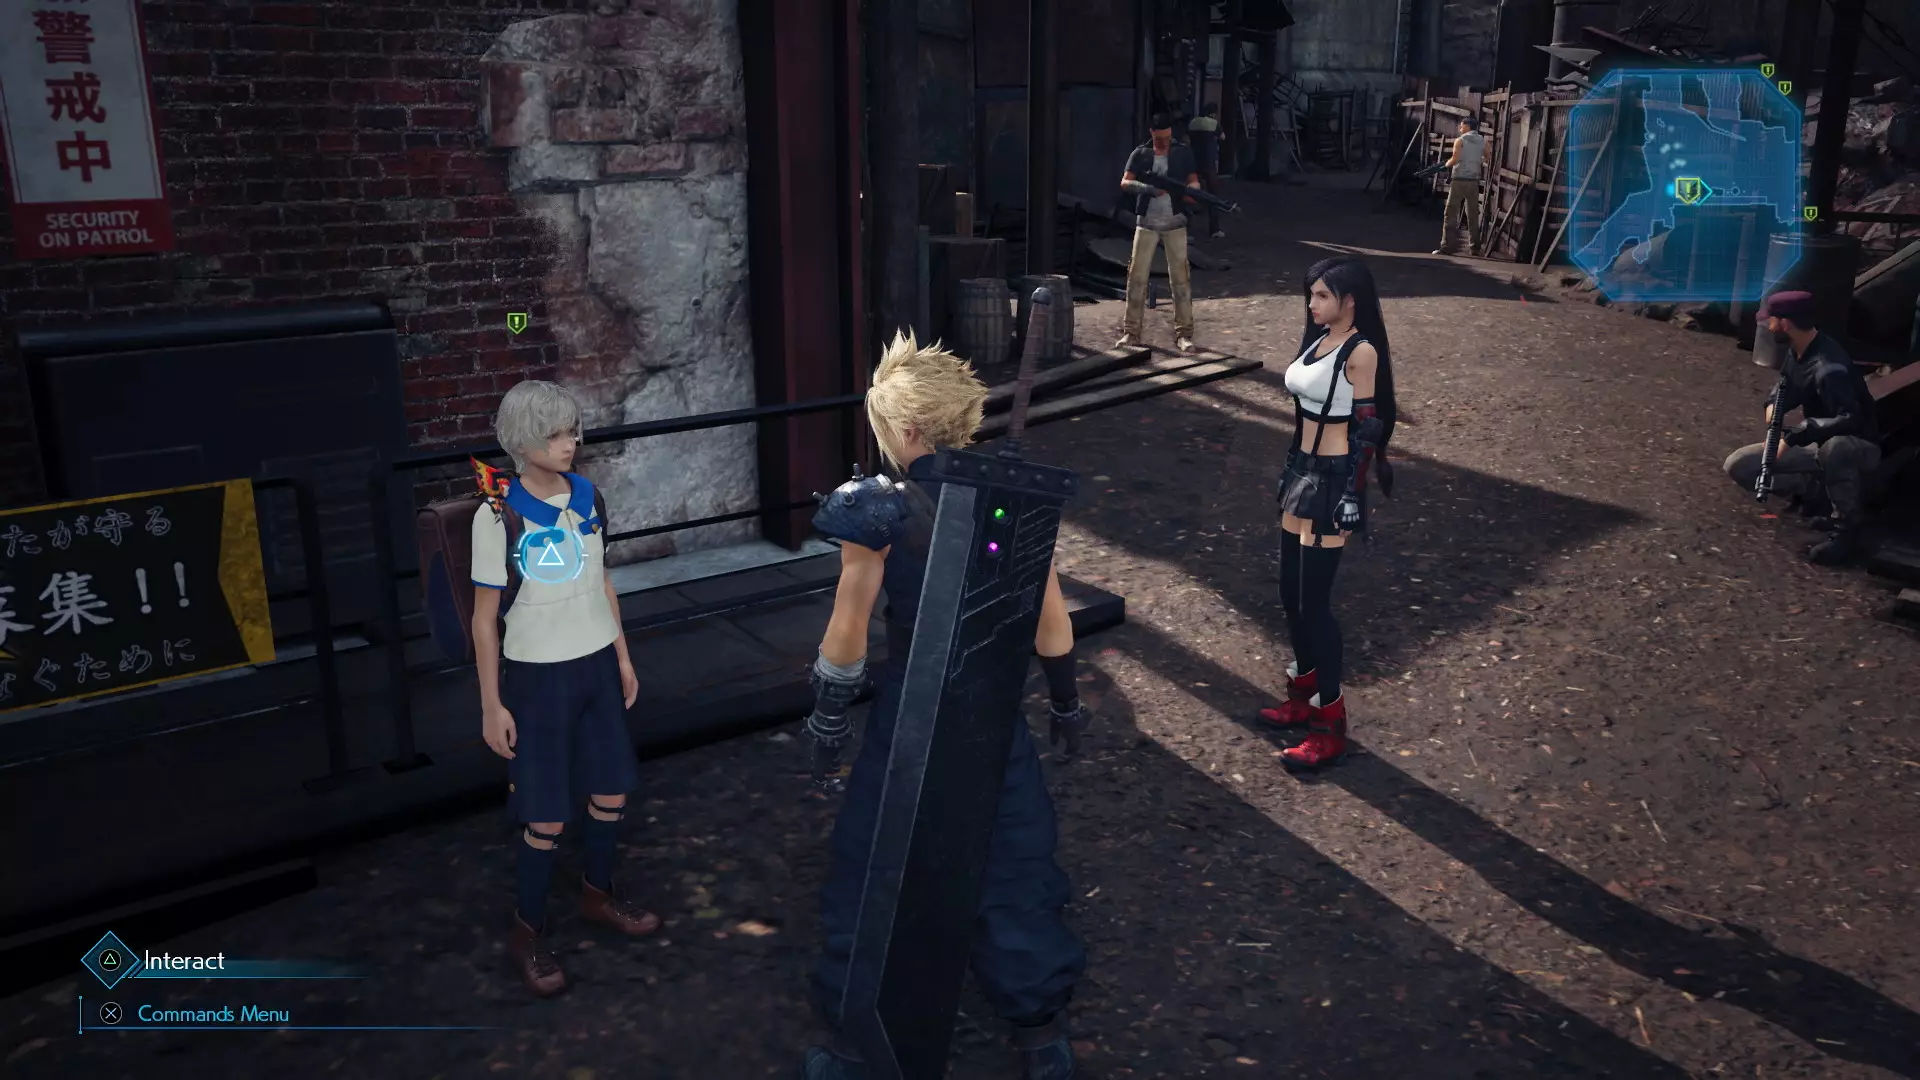 Chadley speaks to Cloud and Tifa /